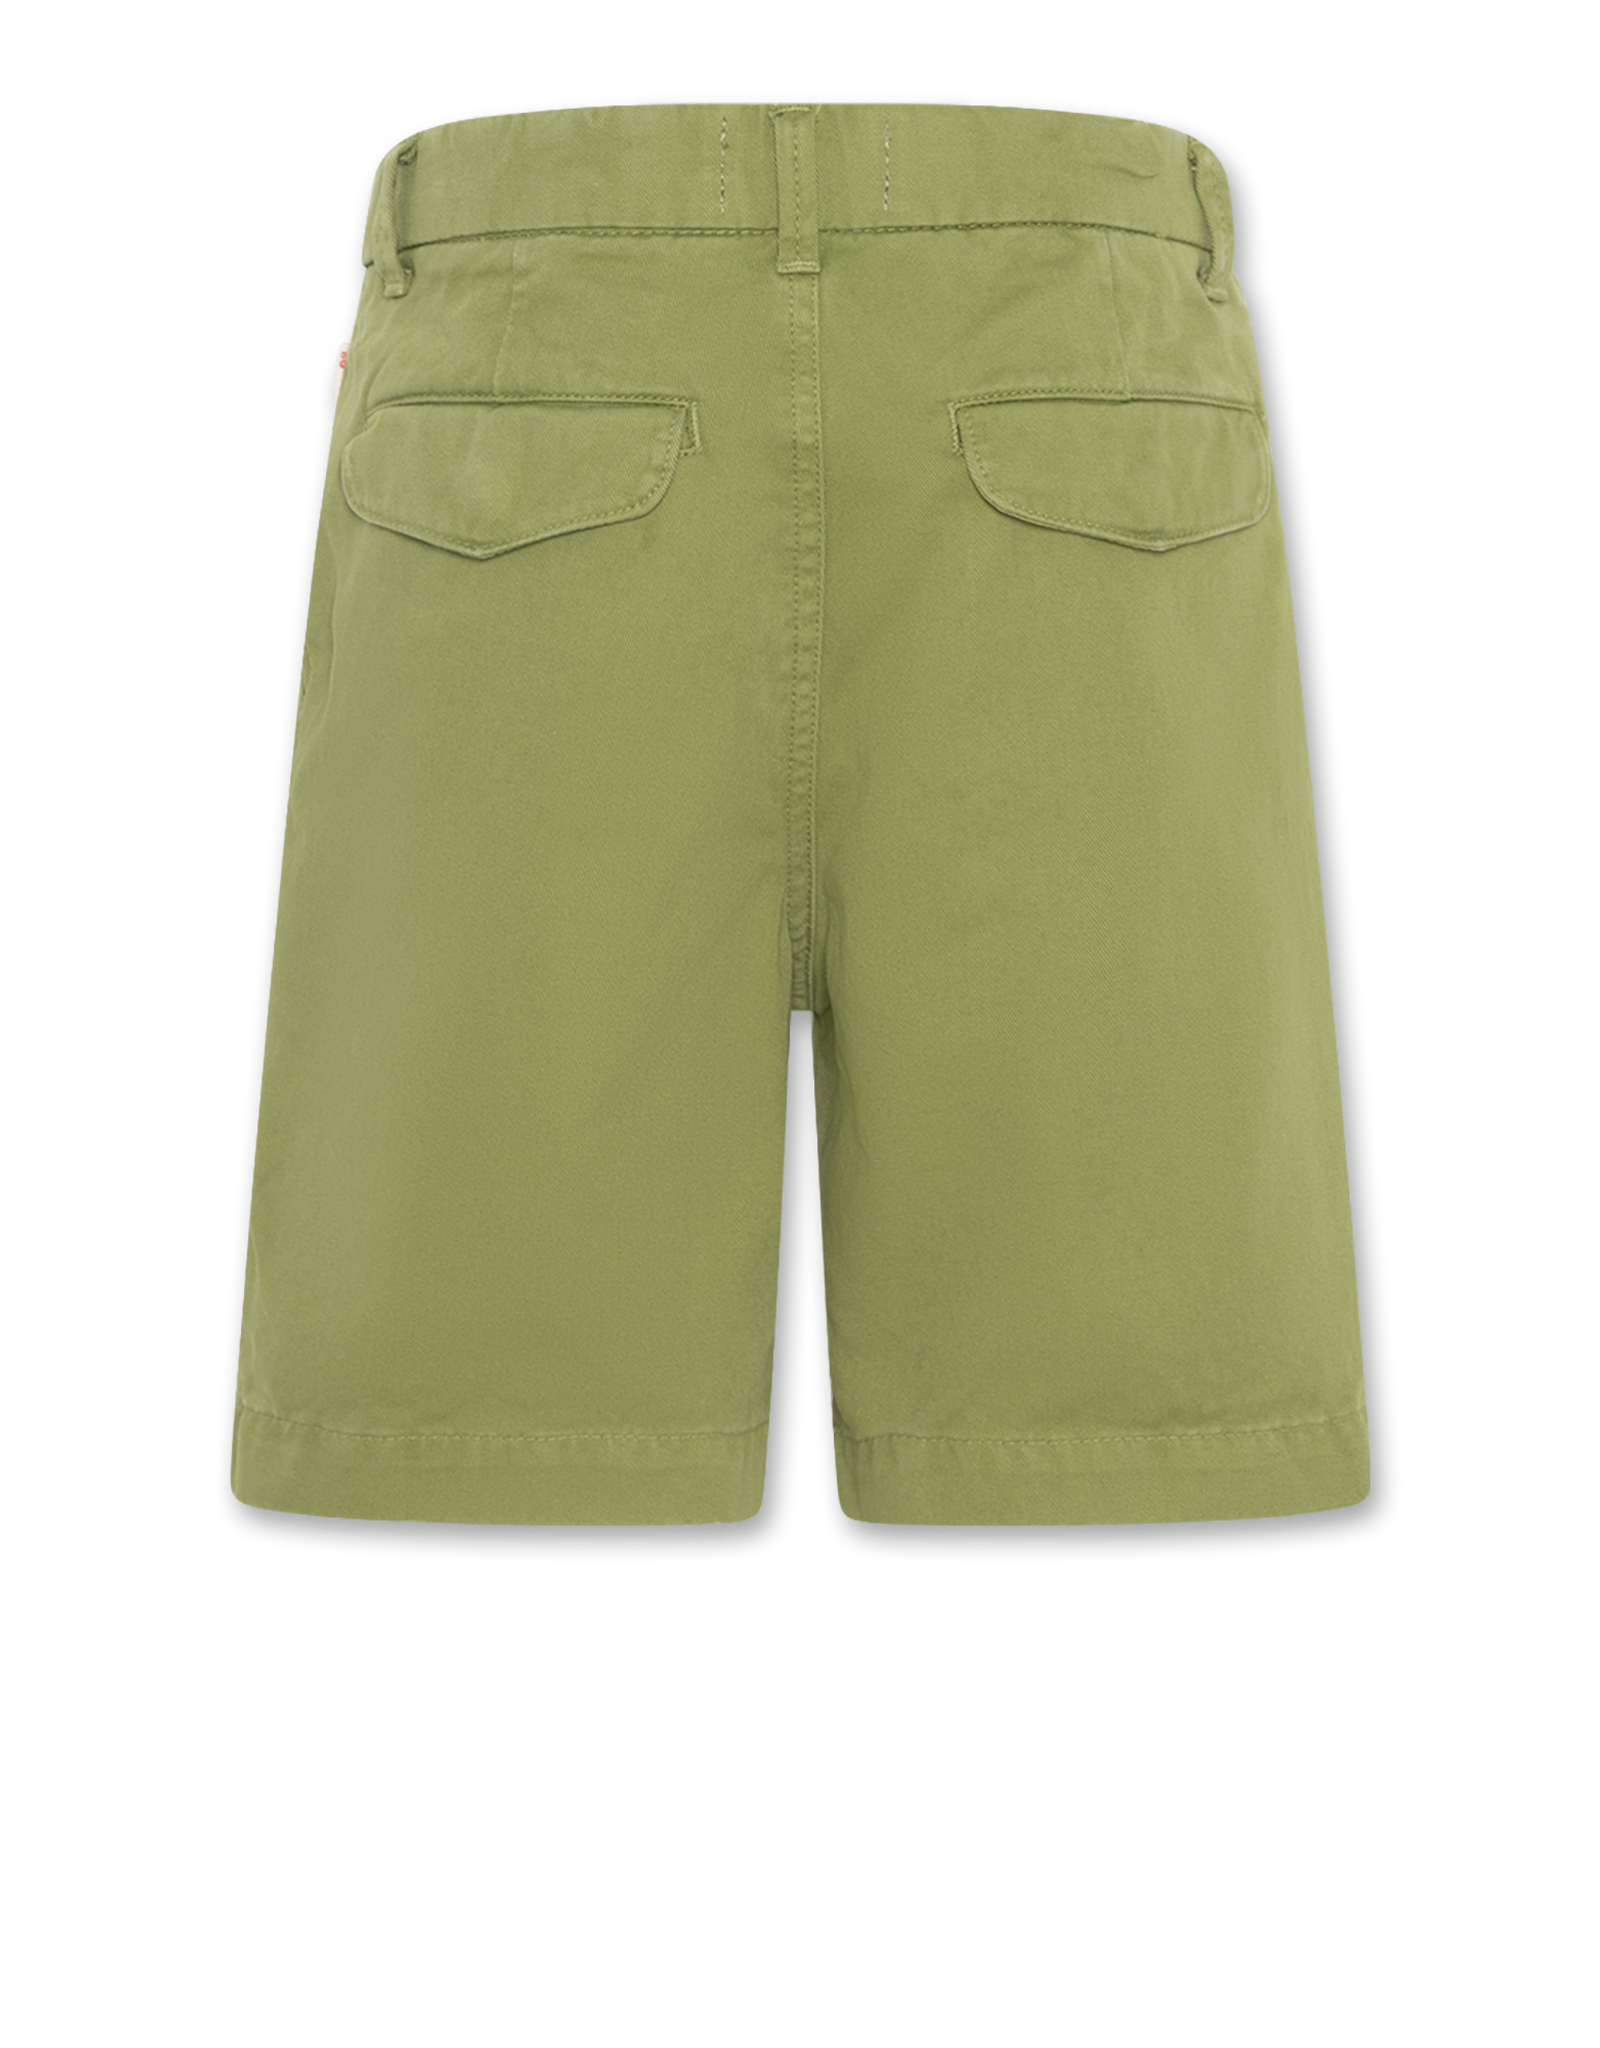 AMERICAN OUTFITTERS Ao76 Bill shorts army